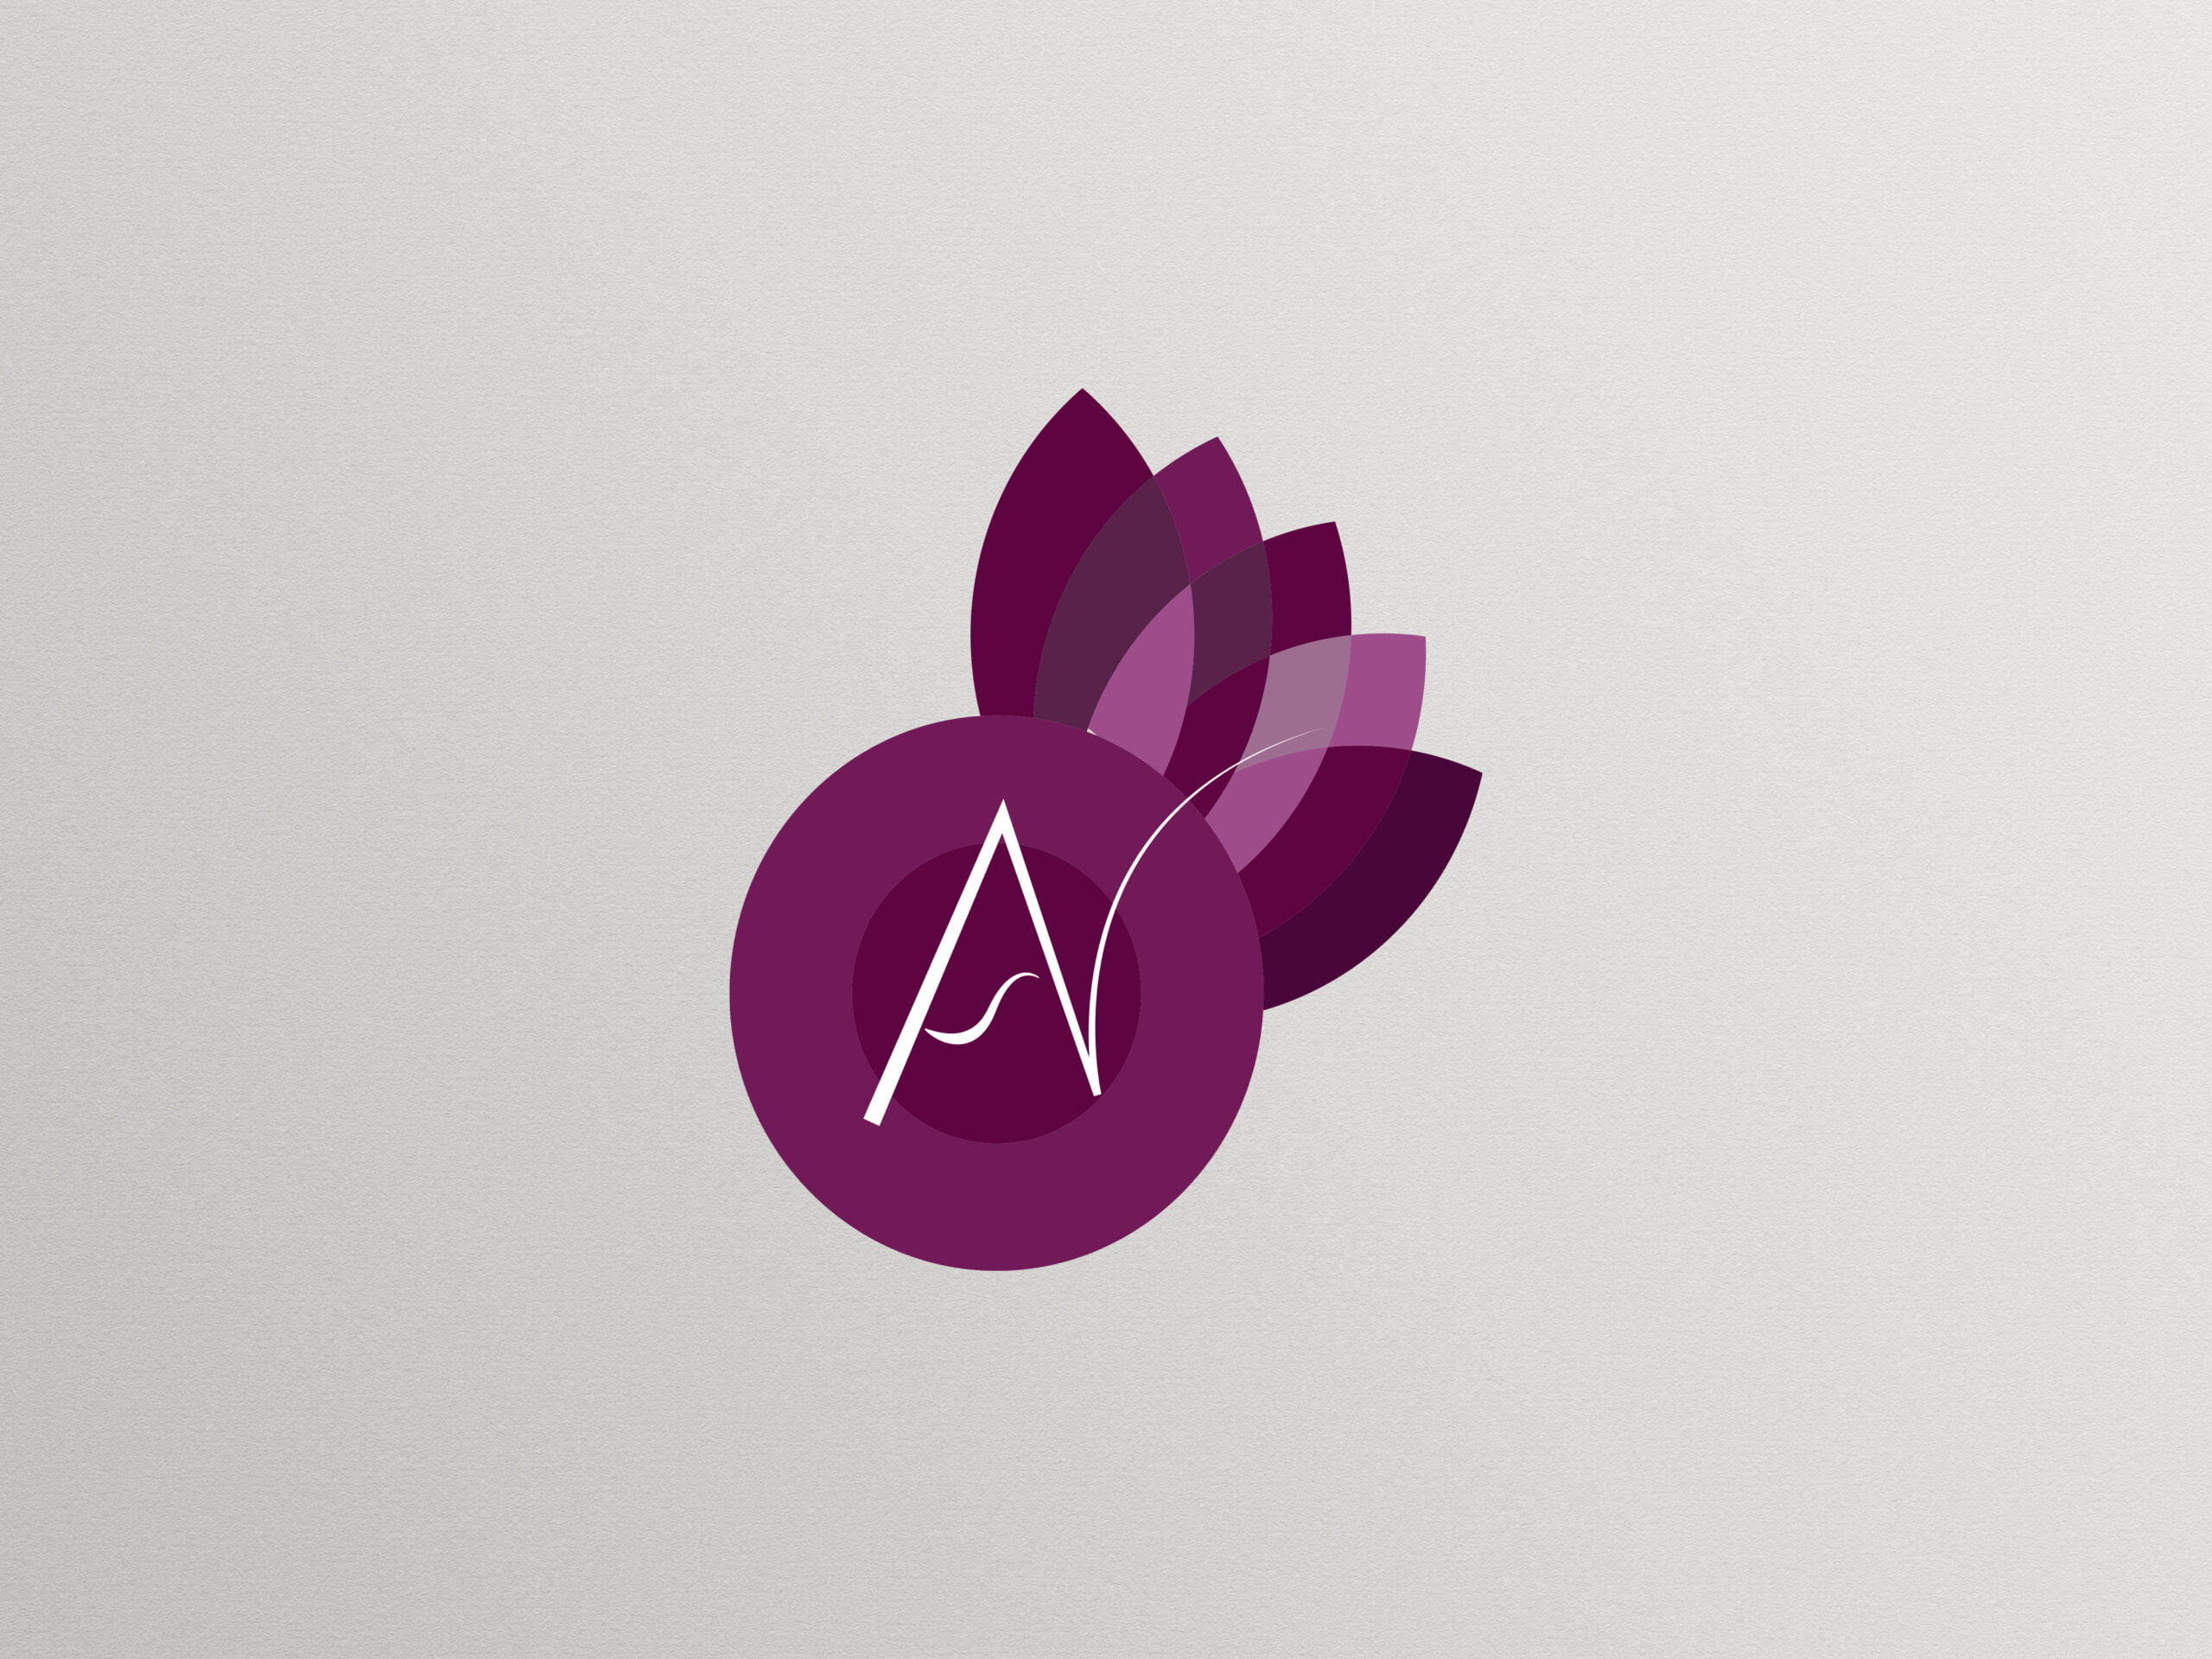 a logo with purple and white colors logocreativearts 5 Creative logo design in the world